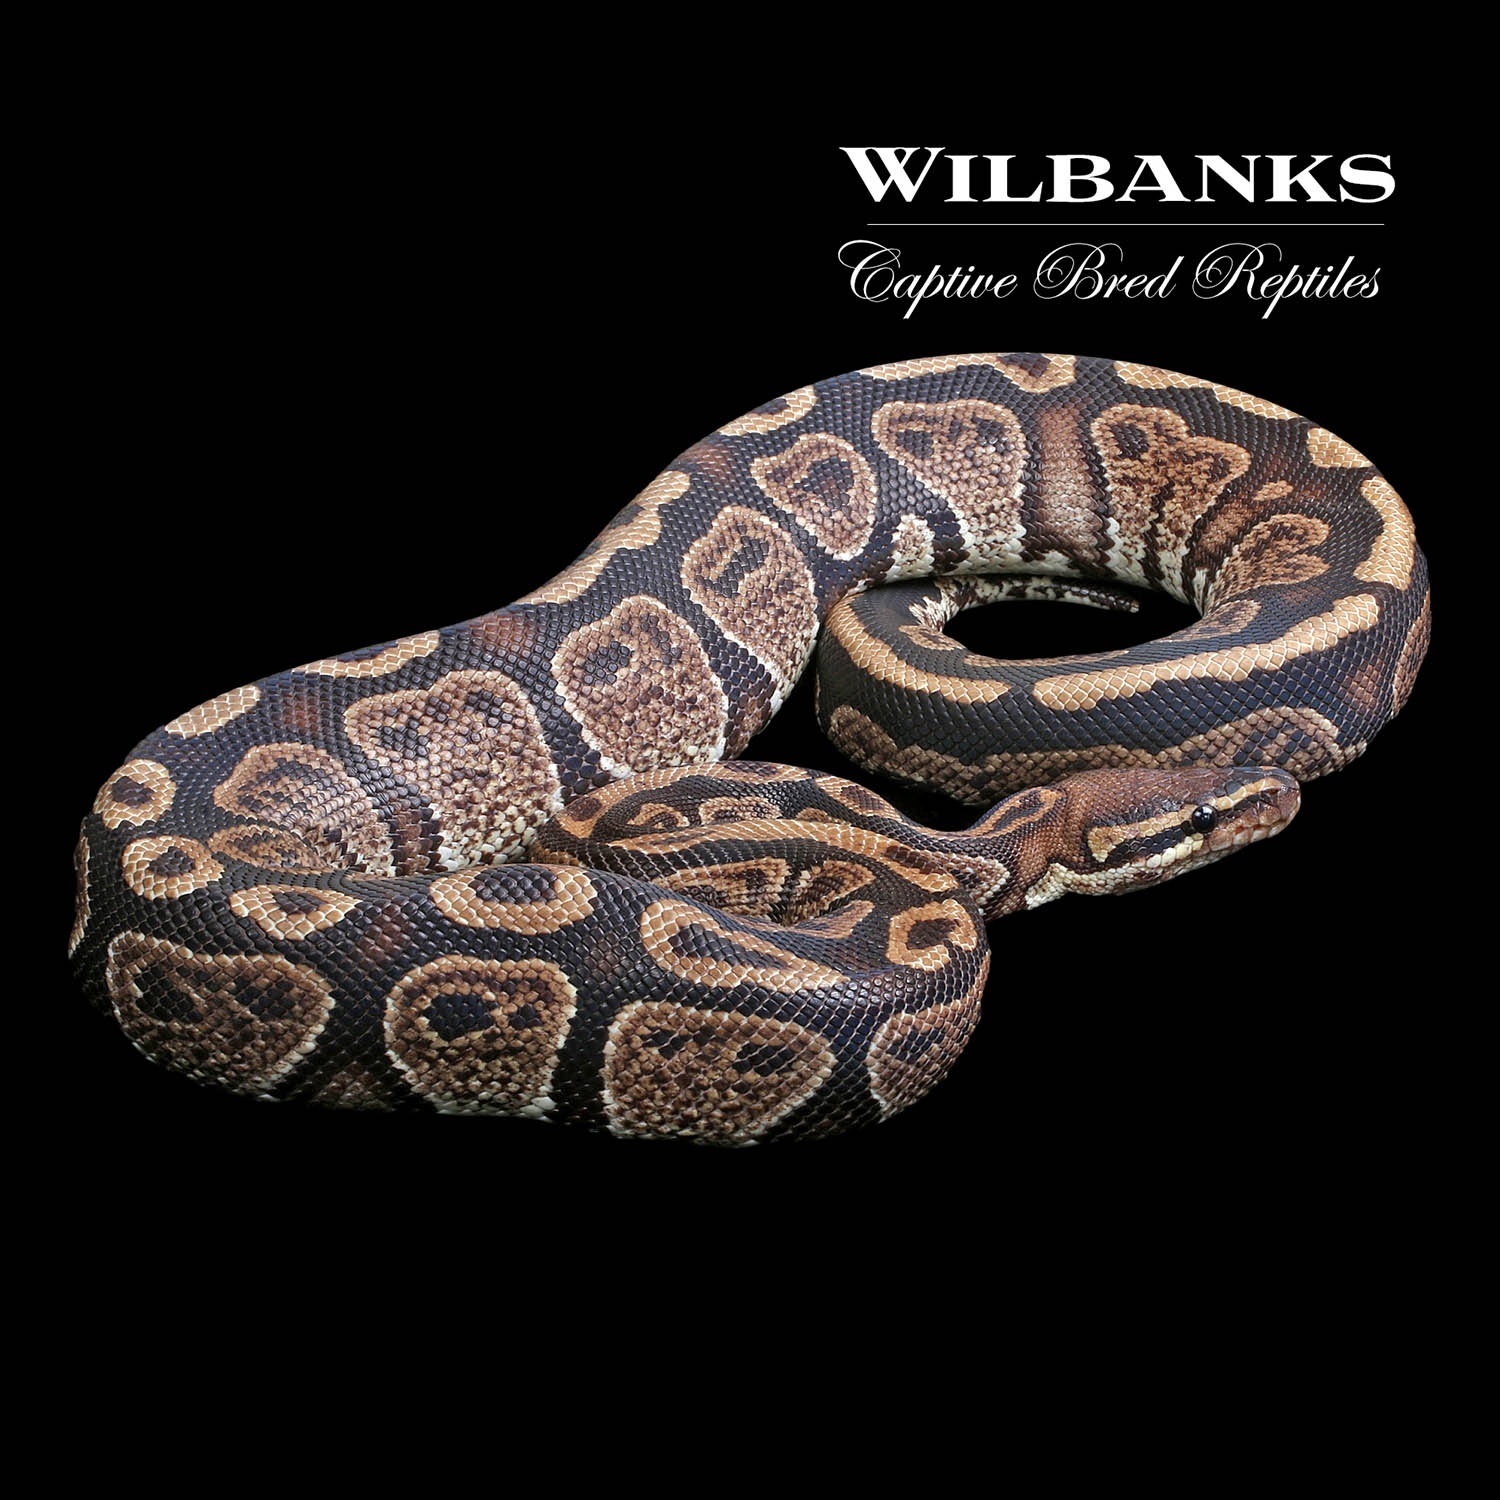 Granite Ball Python by Wilbanks Captive Bred Reptiles